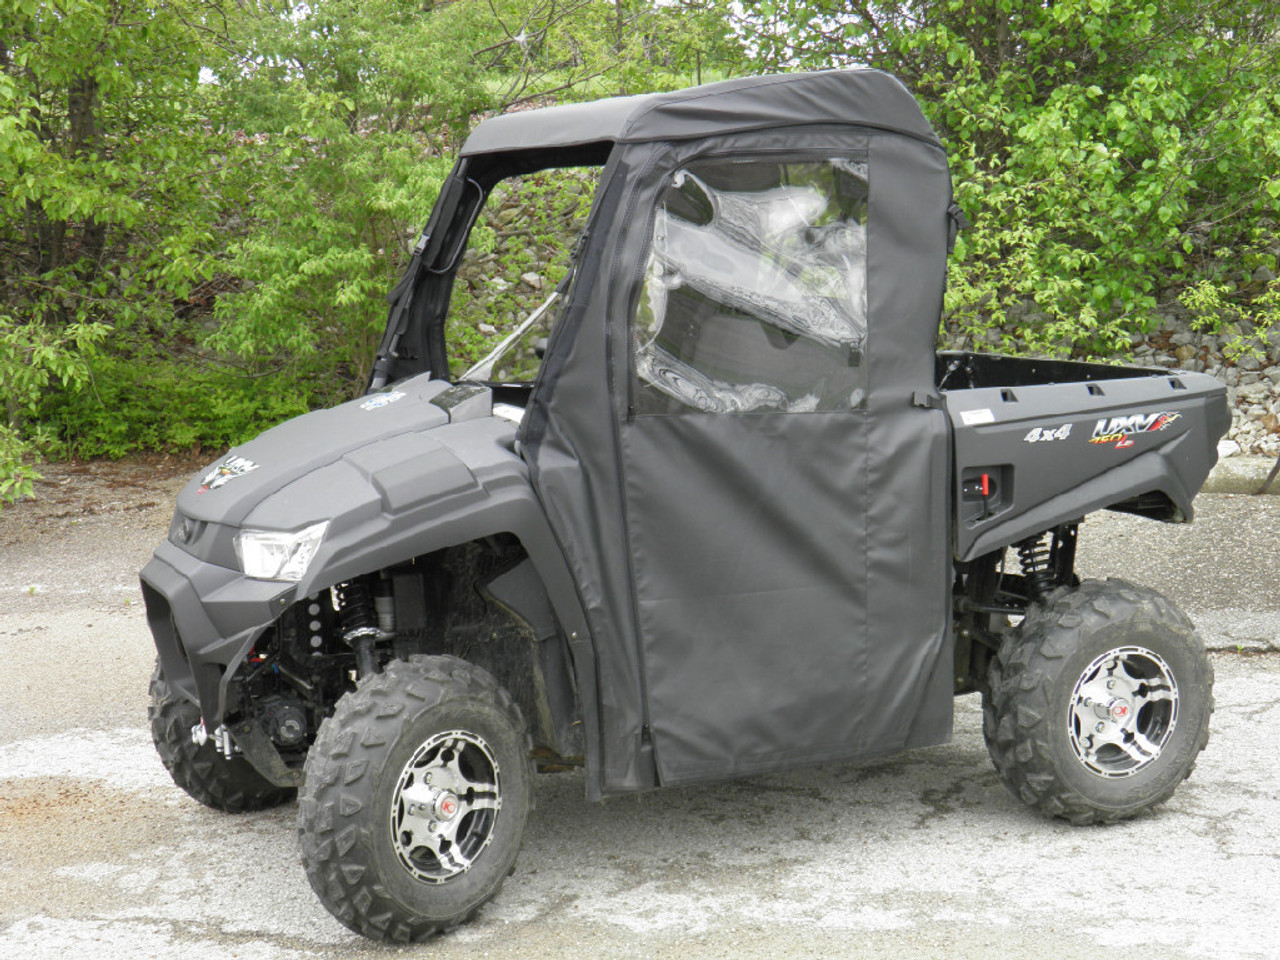 Kymco 500 Full Cab Enclosure for Hard Windshield